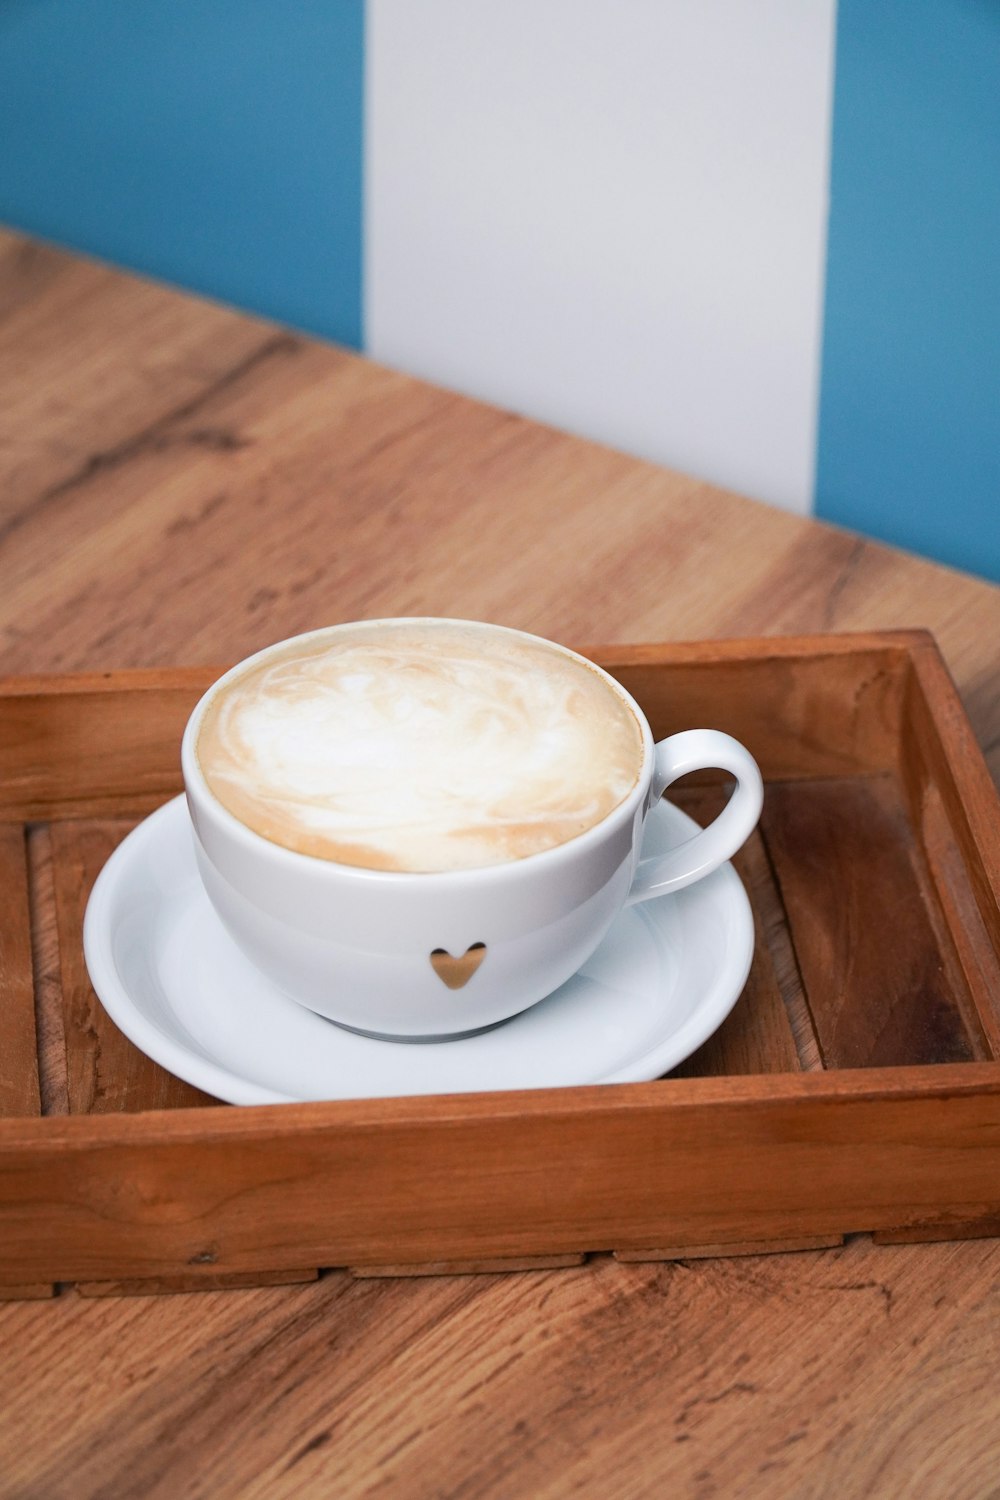 a cup of cappuccino on a wooden tray